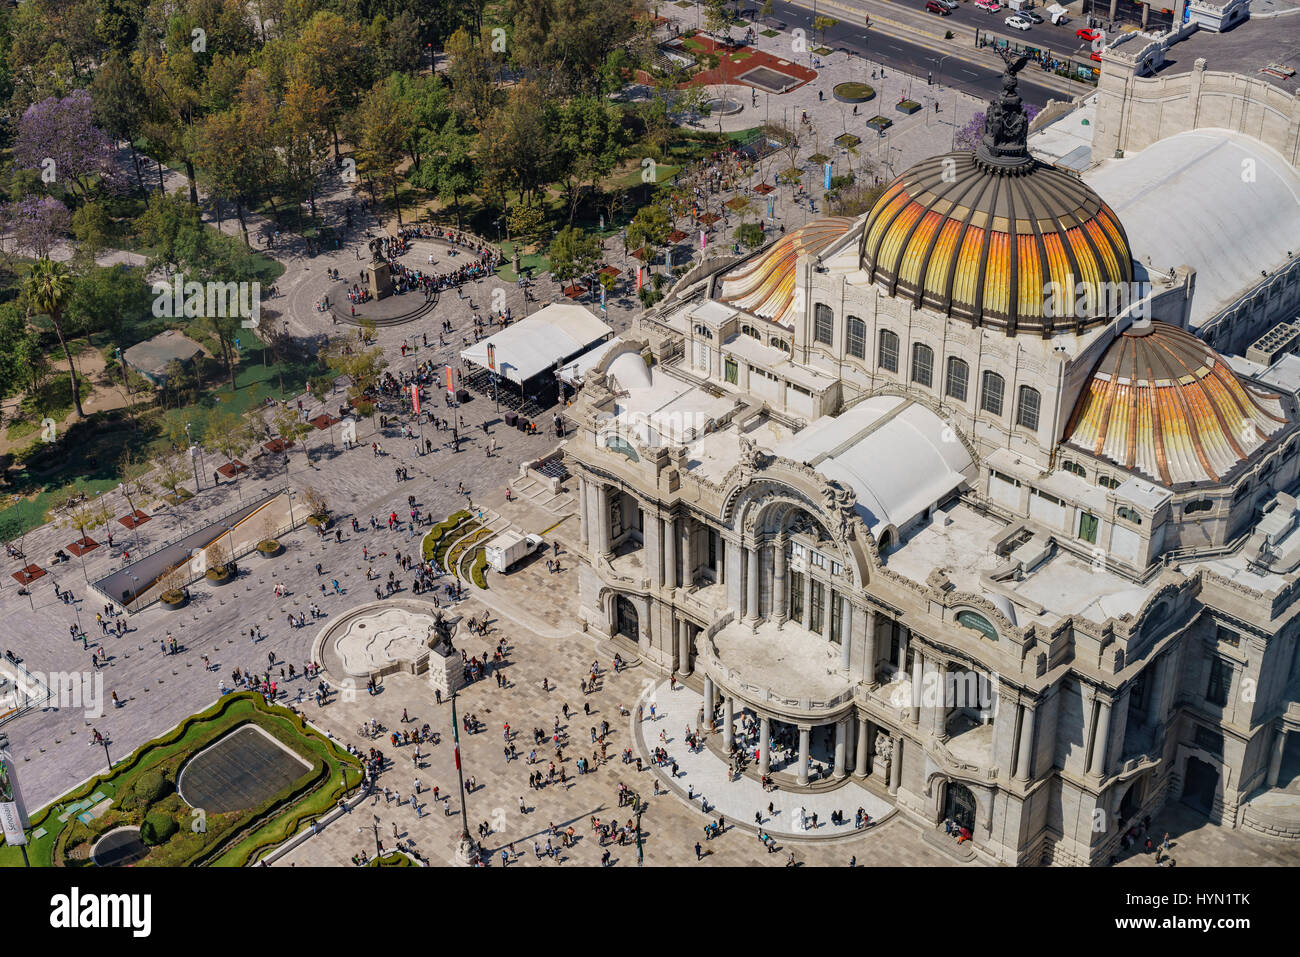 Aerial view of the Palace of Fine Arts with Central Alameda Park of Mexico City Stock Photo